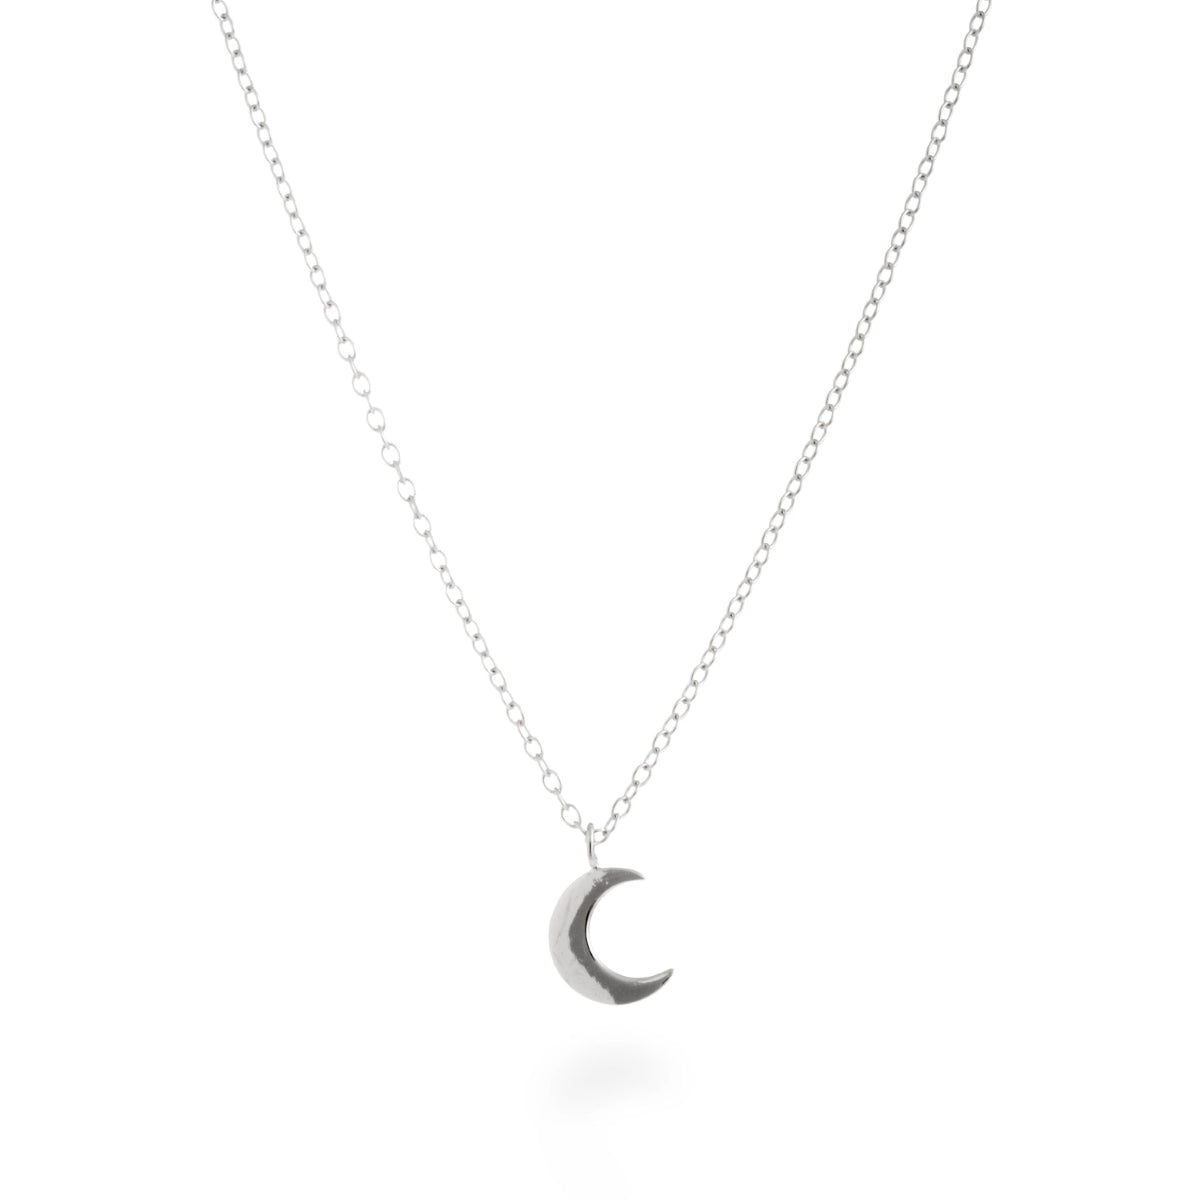 Rhodium Plated 925 Sterling Silver Crescent Necklace